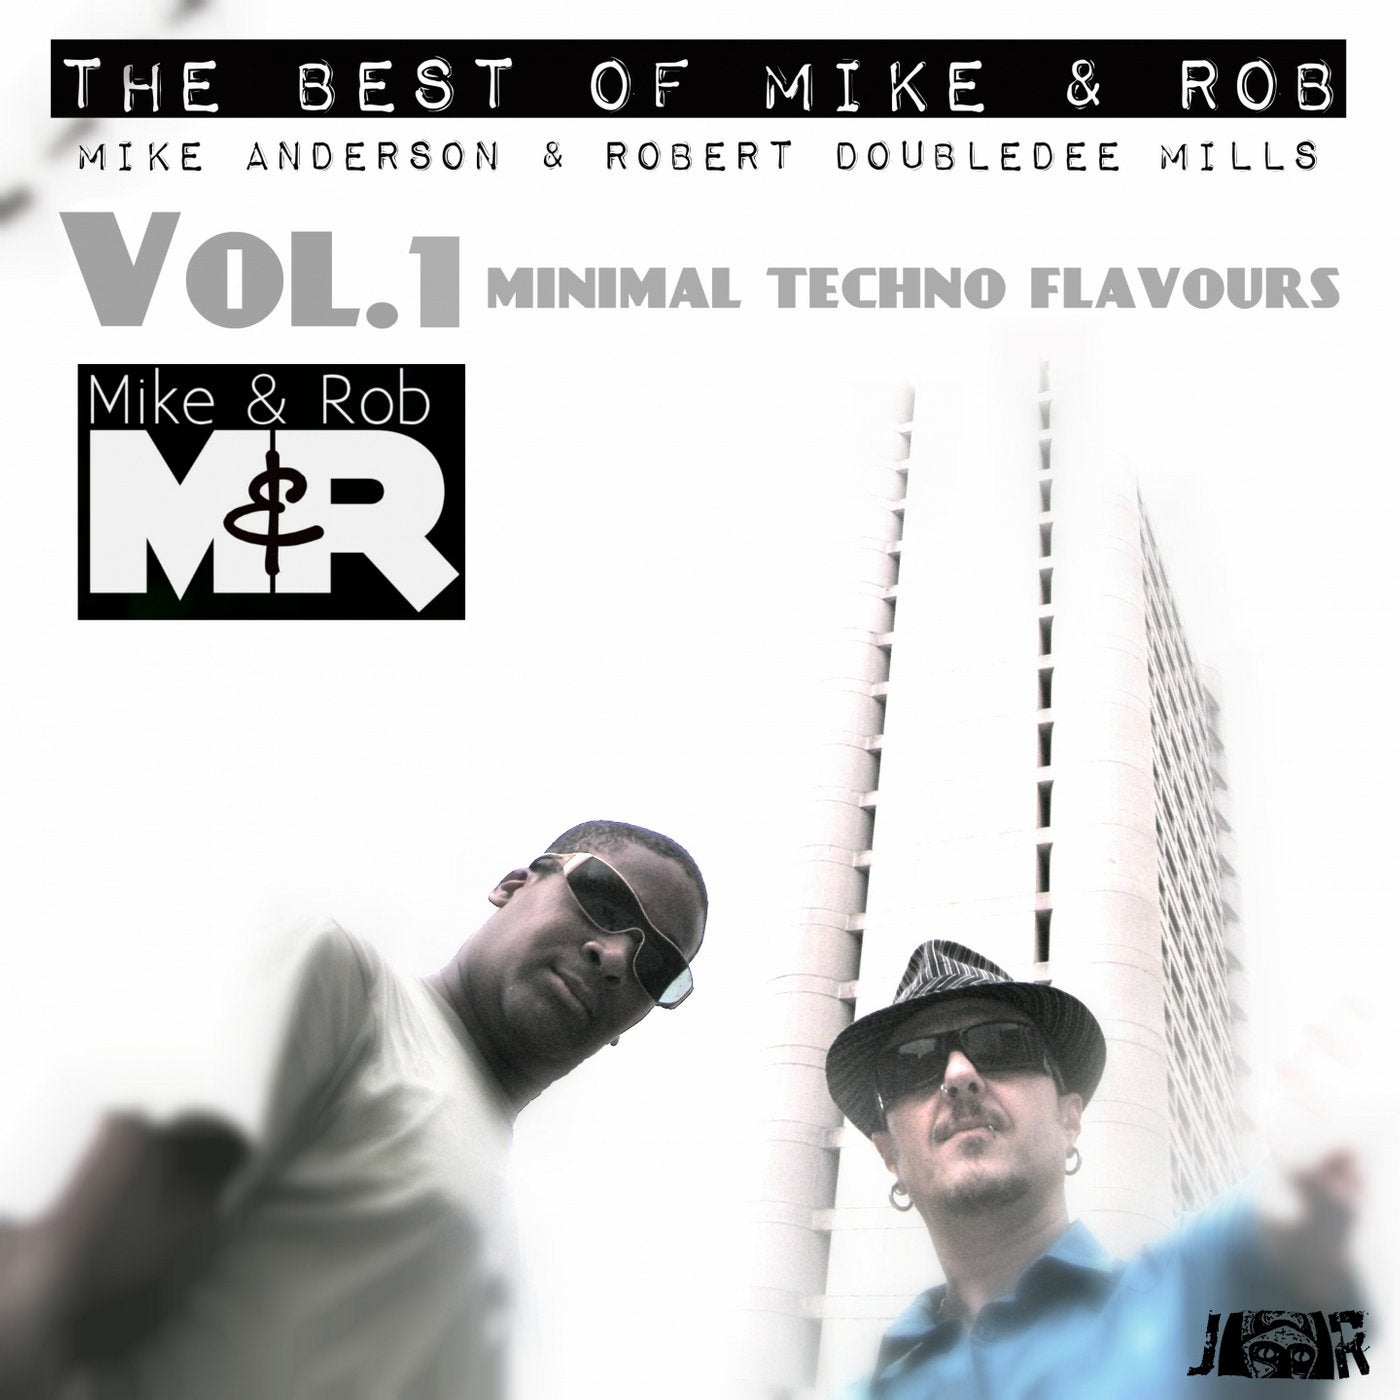 The Best of Mike & Rob, Vol. 1 (Minimal Techno Flavours)